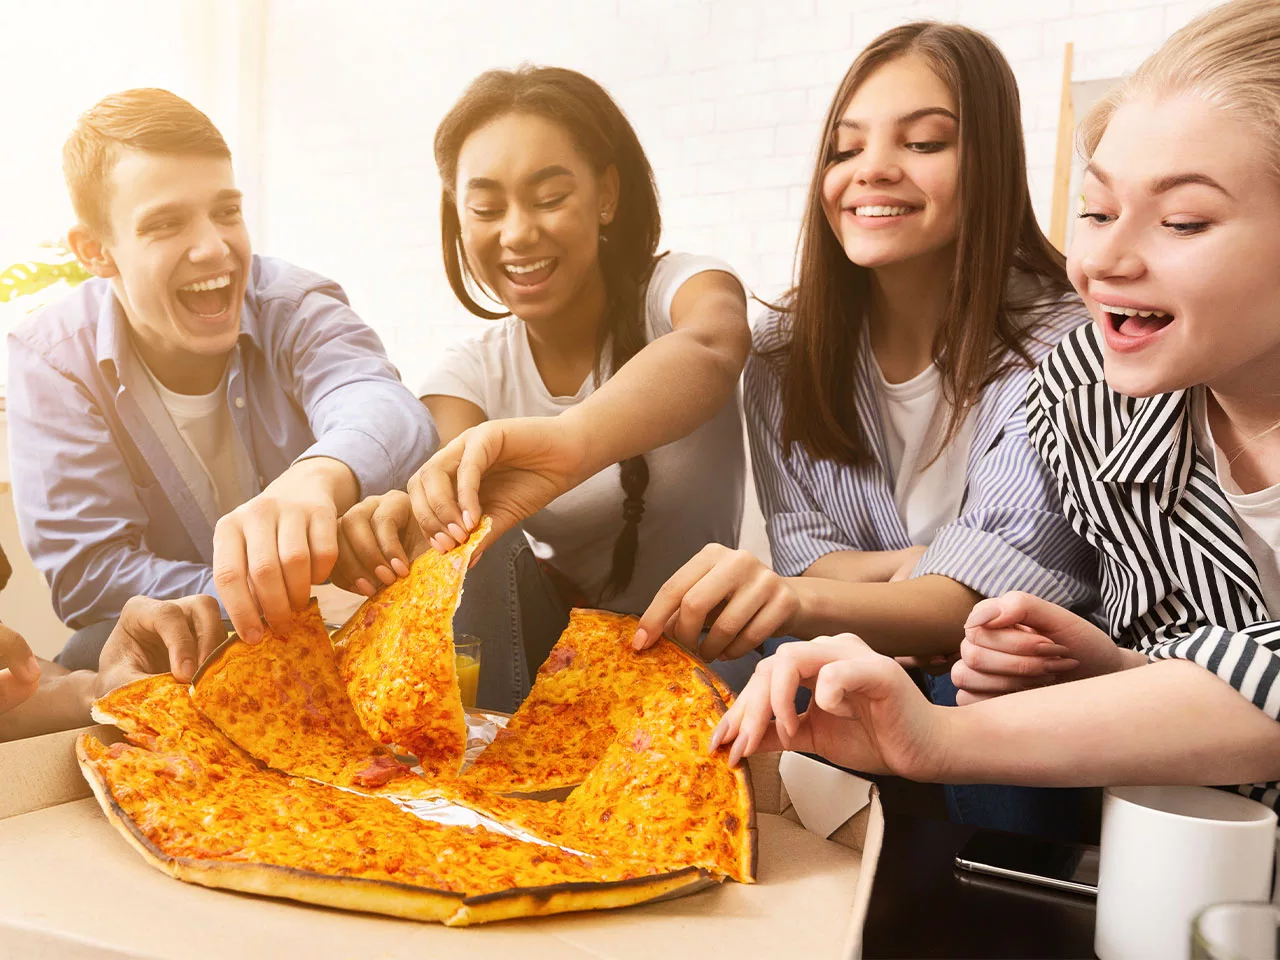 Teens sit around a large cheese pizza, each smiling and taking a slice.